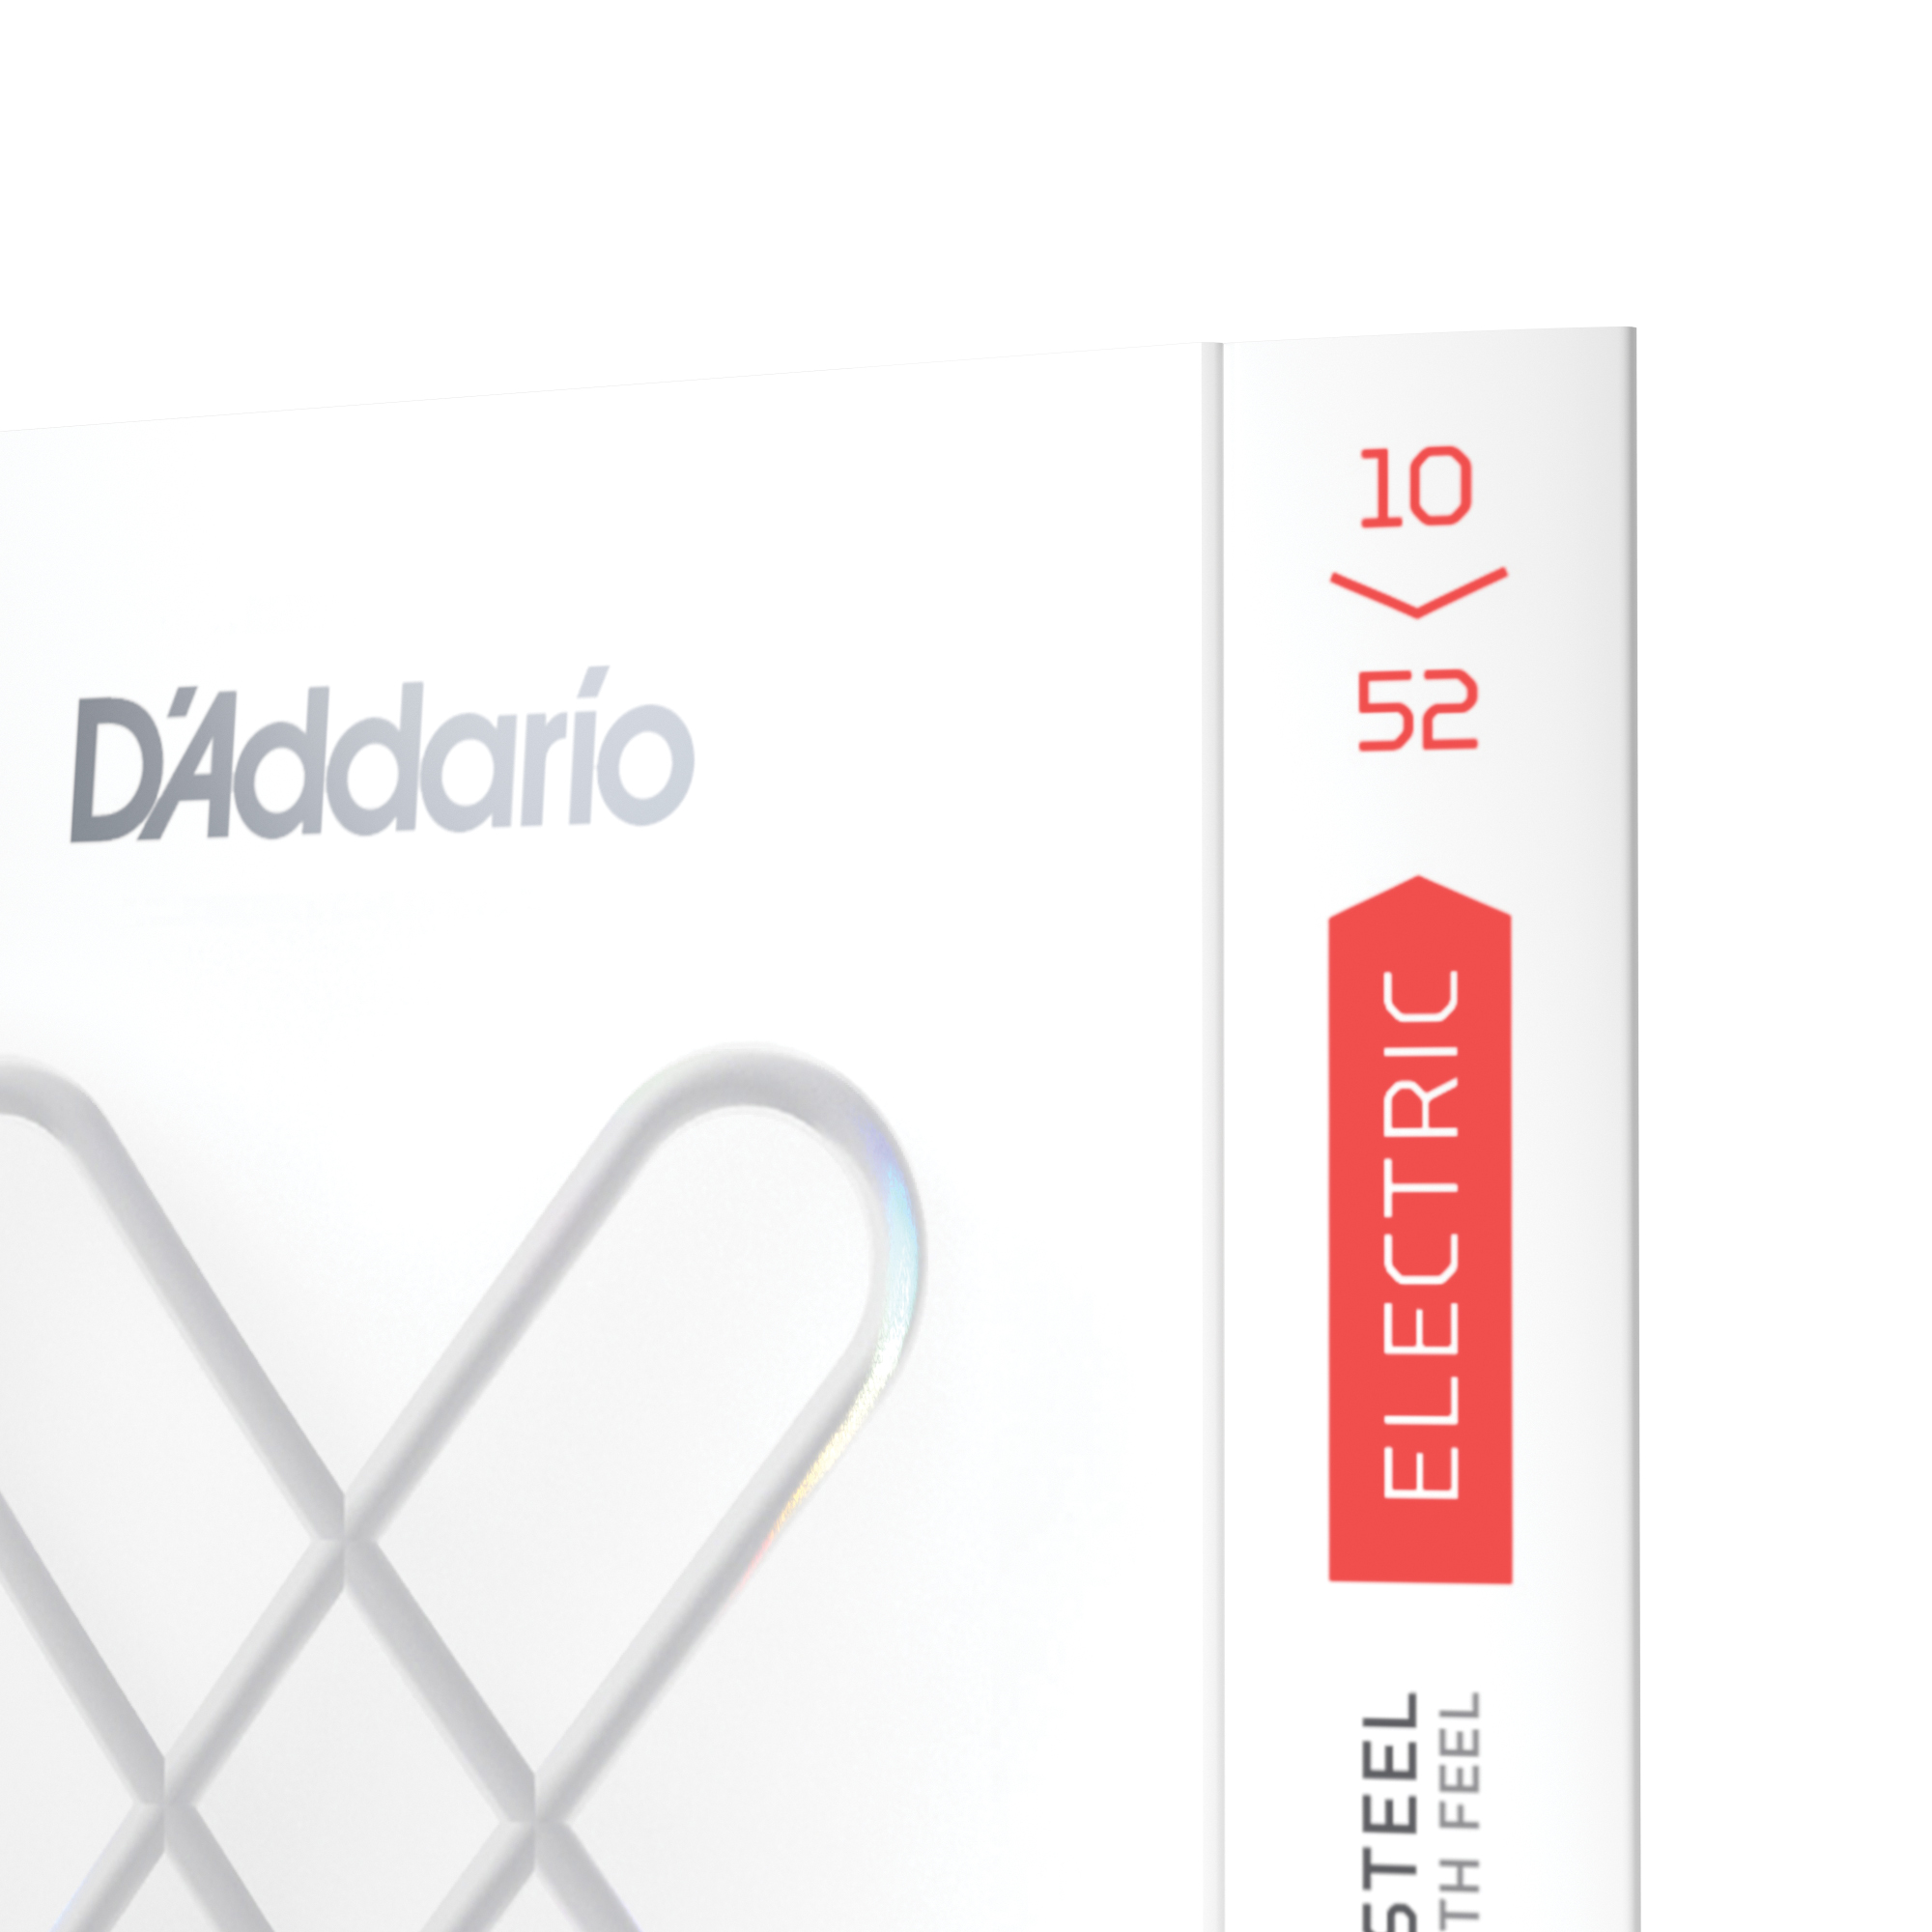 D'addario Xse1052 Nickel Plated Steel Coated Round Wound Electric Guitar 6c 10-52 - Cordes Guitare Électrique - Variation 3